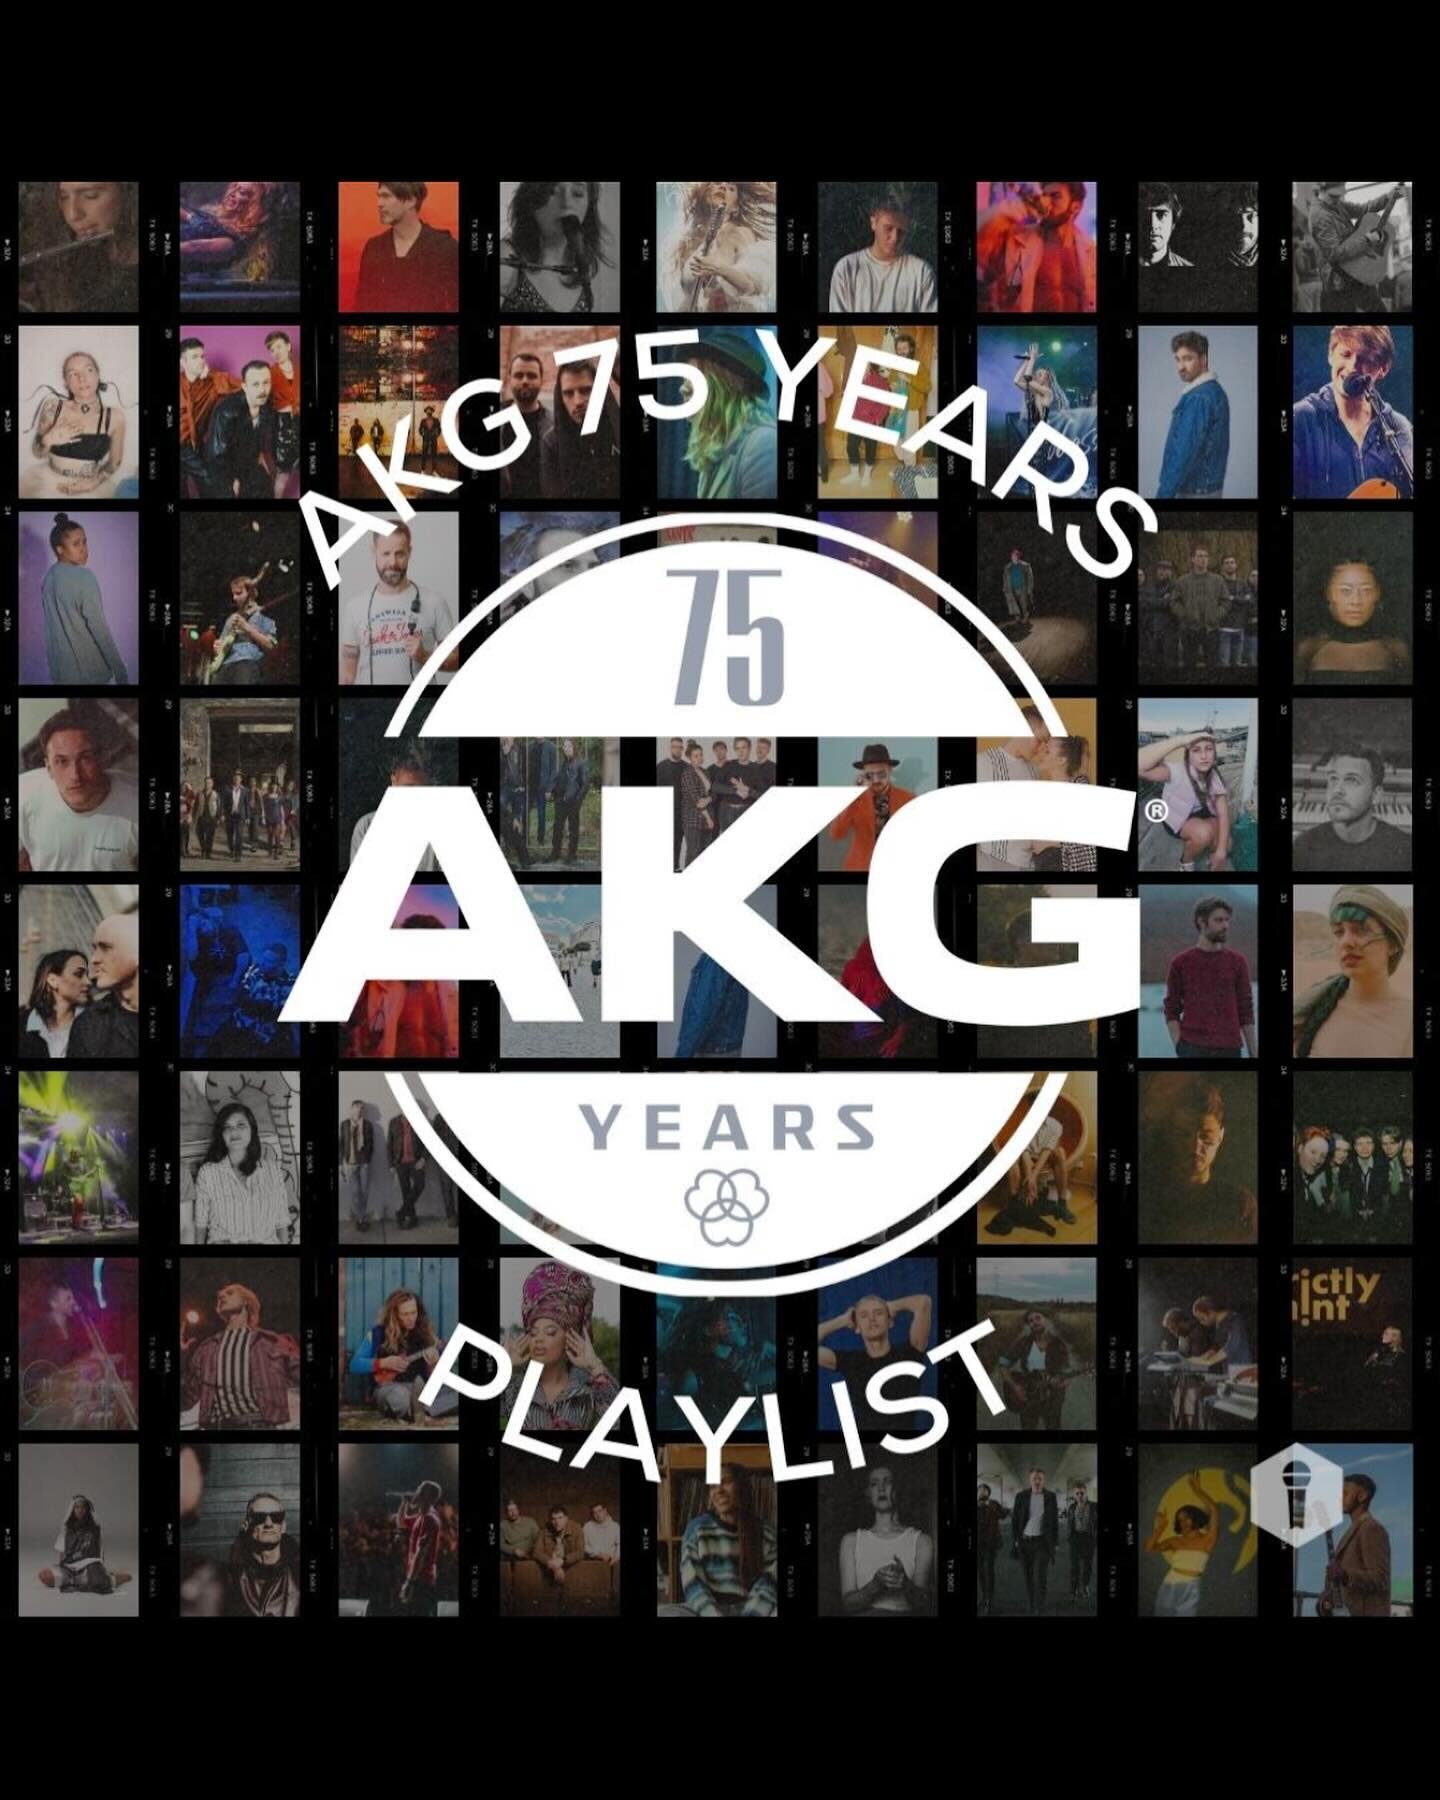 My music is on @akgaudio playlist!! THANK YOU 🙏🏽🙏🏽🫶🏽 check out and discover all the cool artists on there! 

I am so excited to release new music this year. 
Life has a way of aligning things to create your path if you are just willing to look 